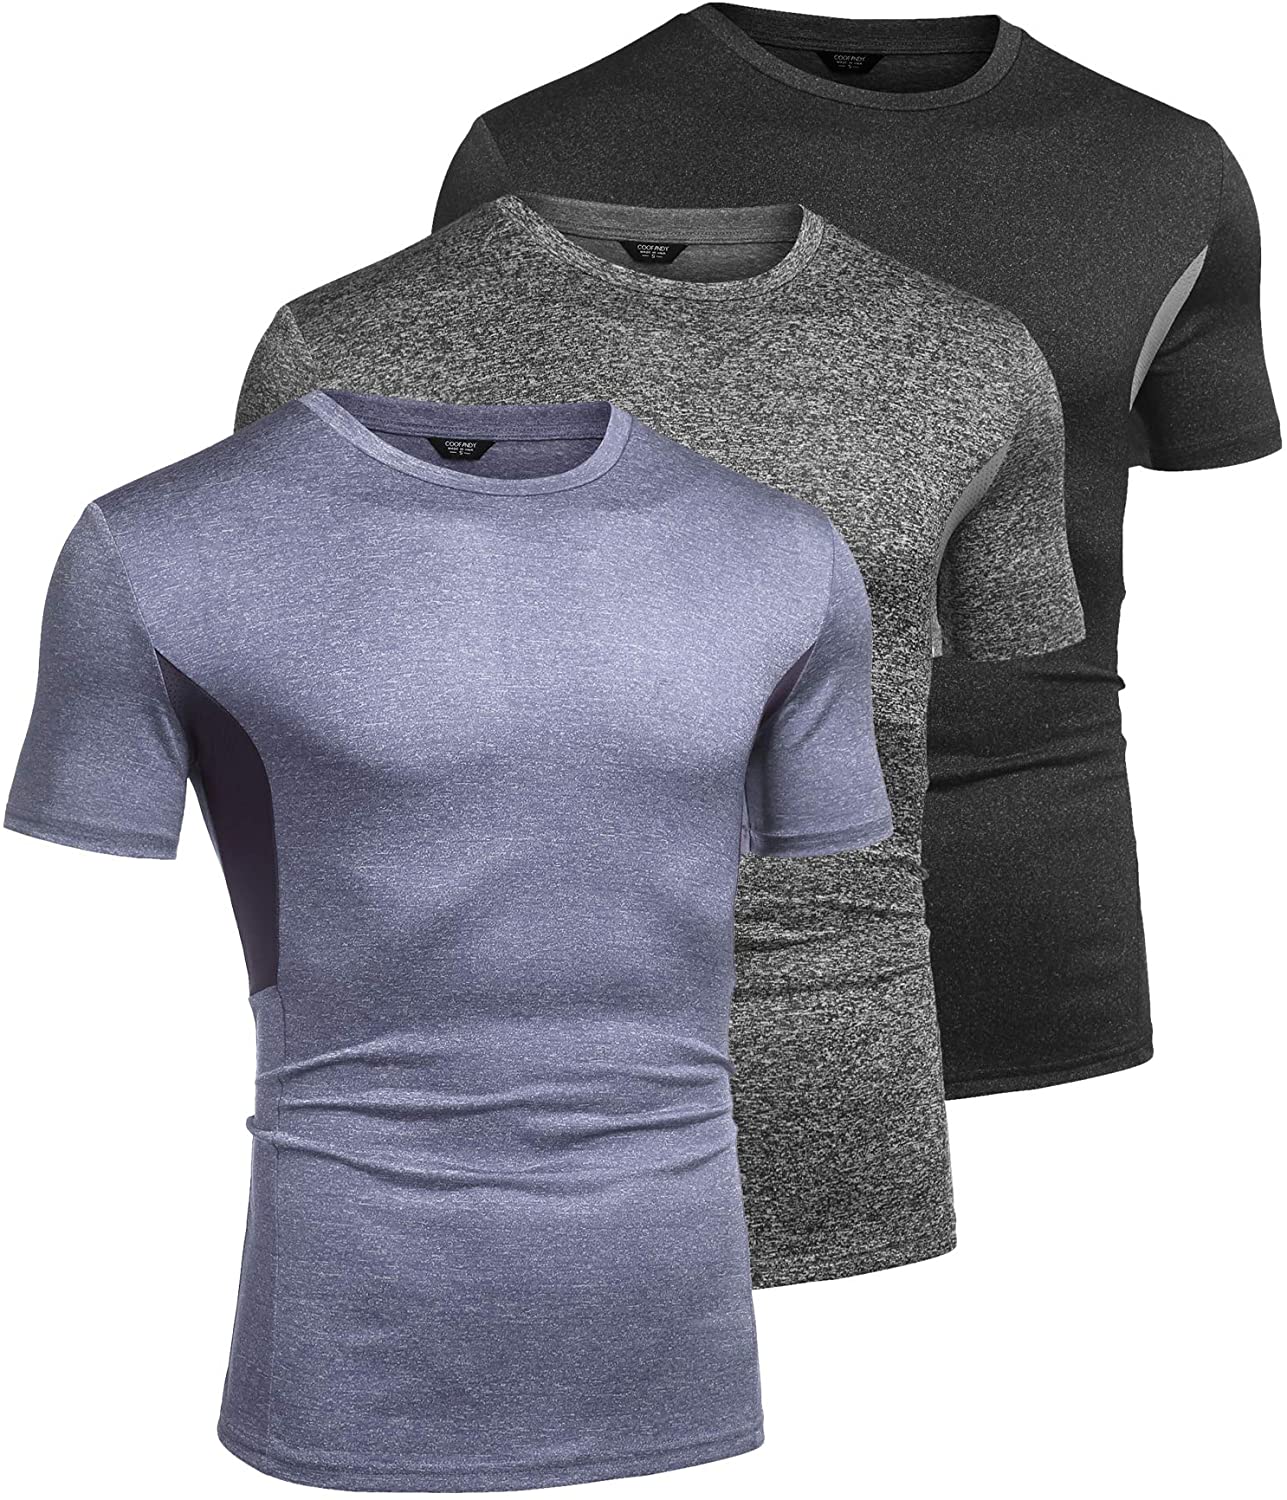 COOFANDY Men's 3 Pack Athletic T Shirts Short Sleeve Dri Fit Running ...